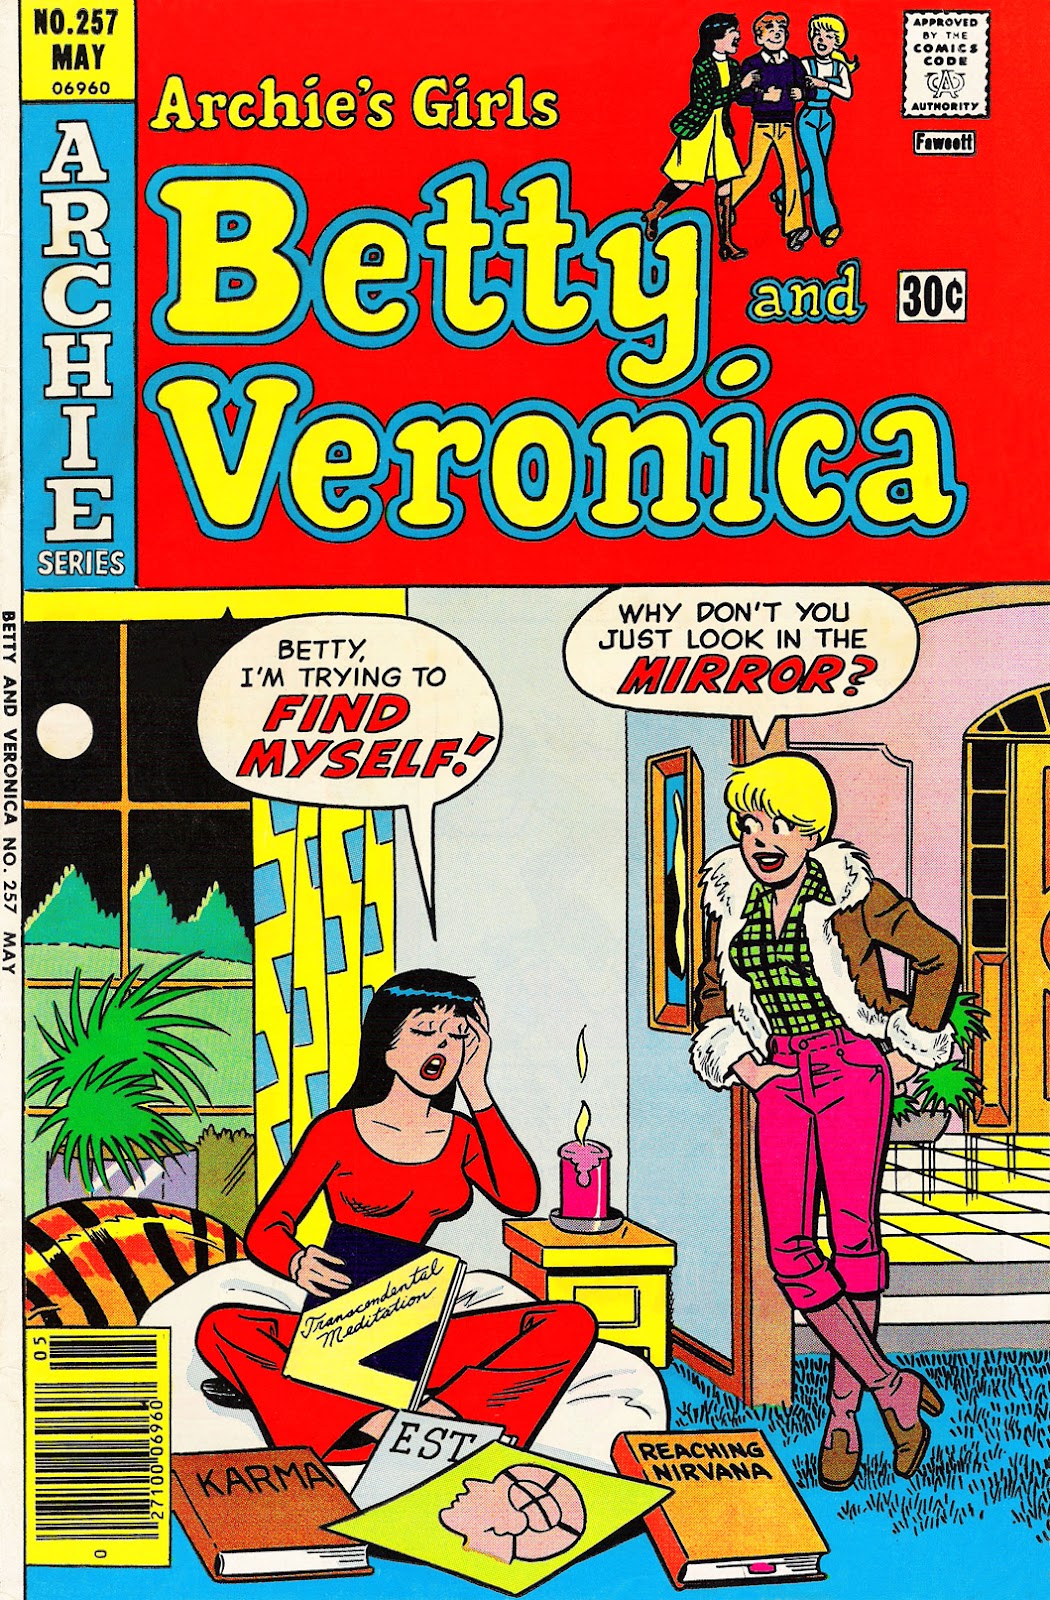 Archie's Girls Betty and Veronica 257 Page 1